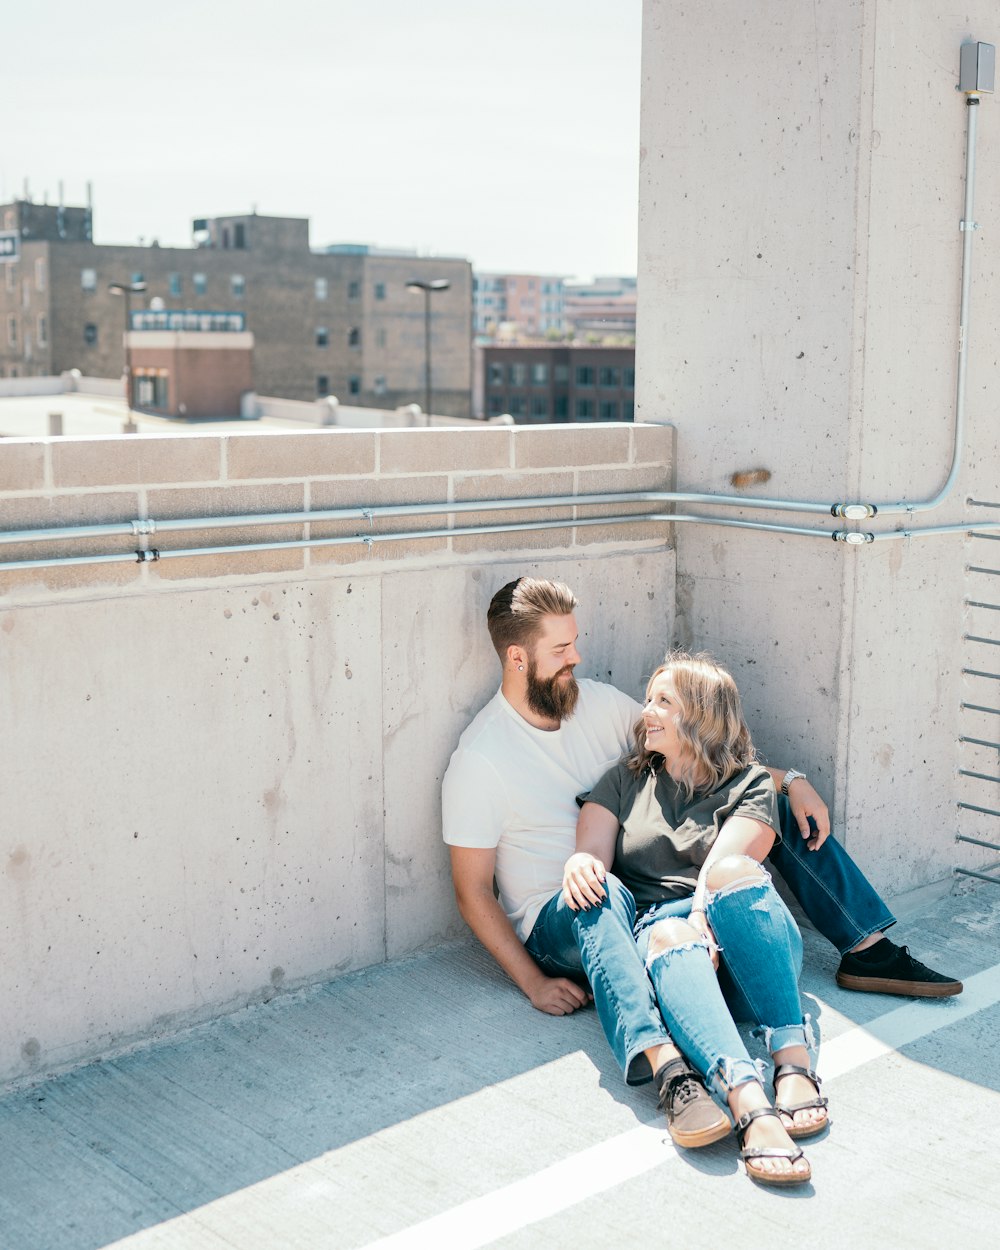 man and woman sitting on concrete wall during daytime